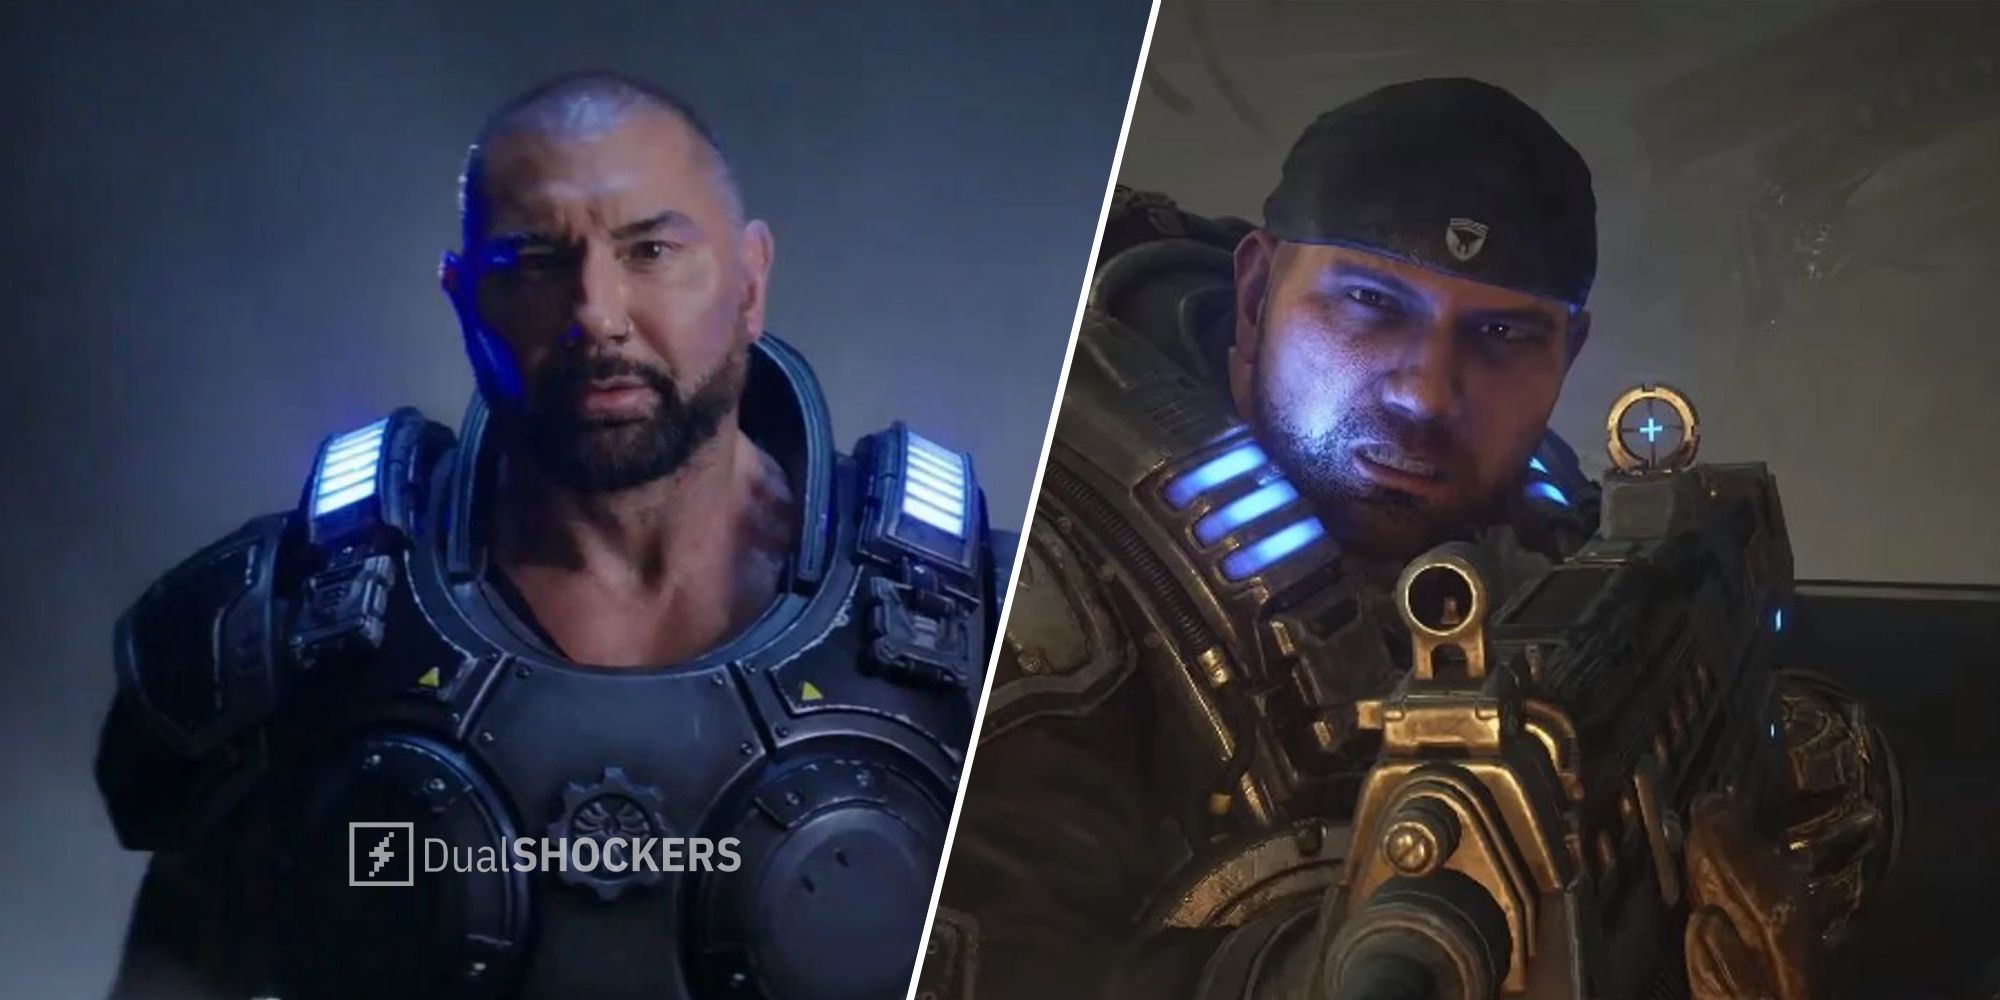 Dave Bautista dressed as Marcus Fenix from Gears Of War, Marcus Fenix Gears of War gameplay